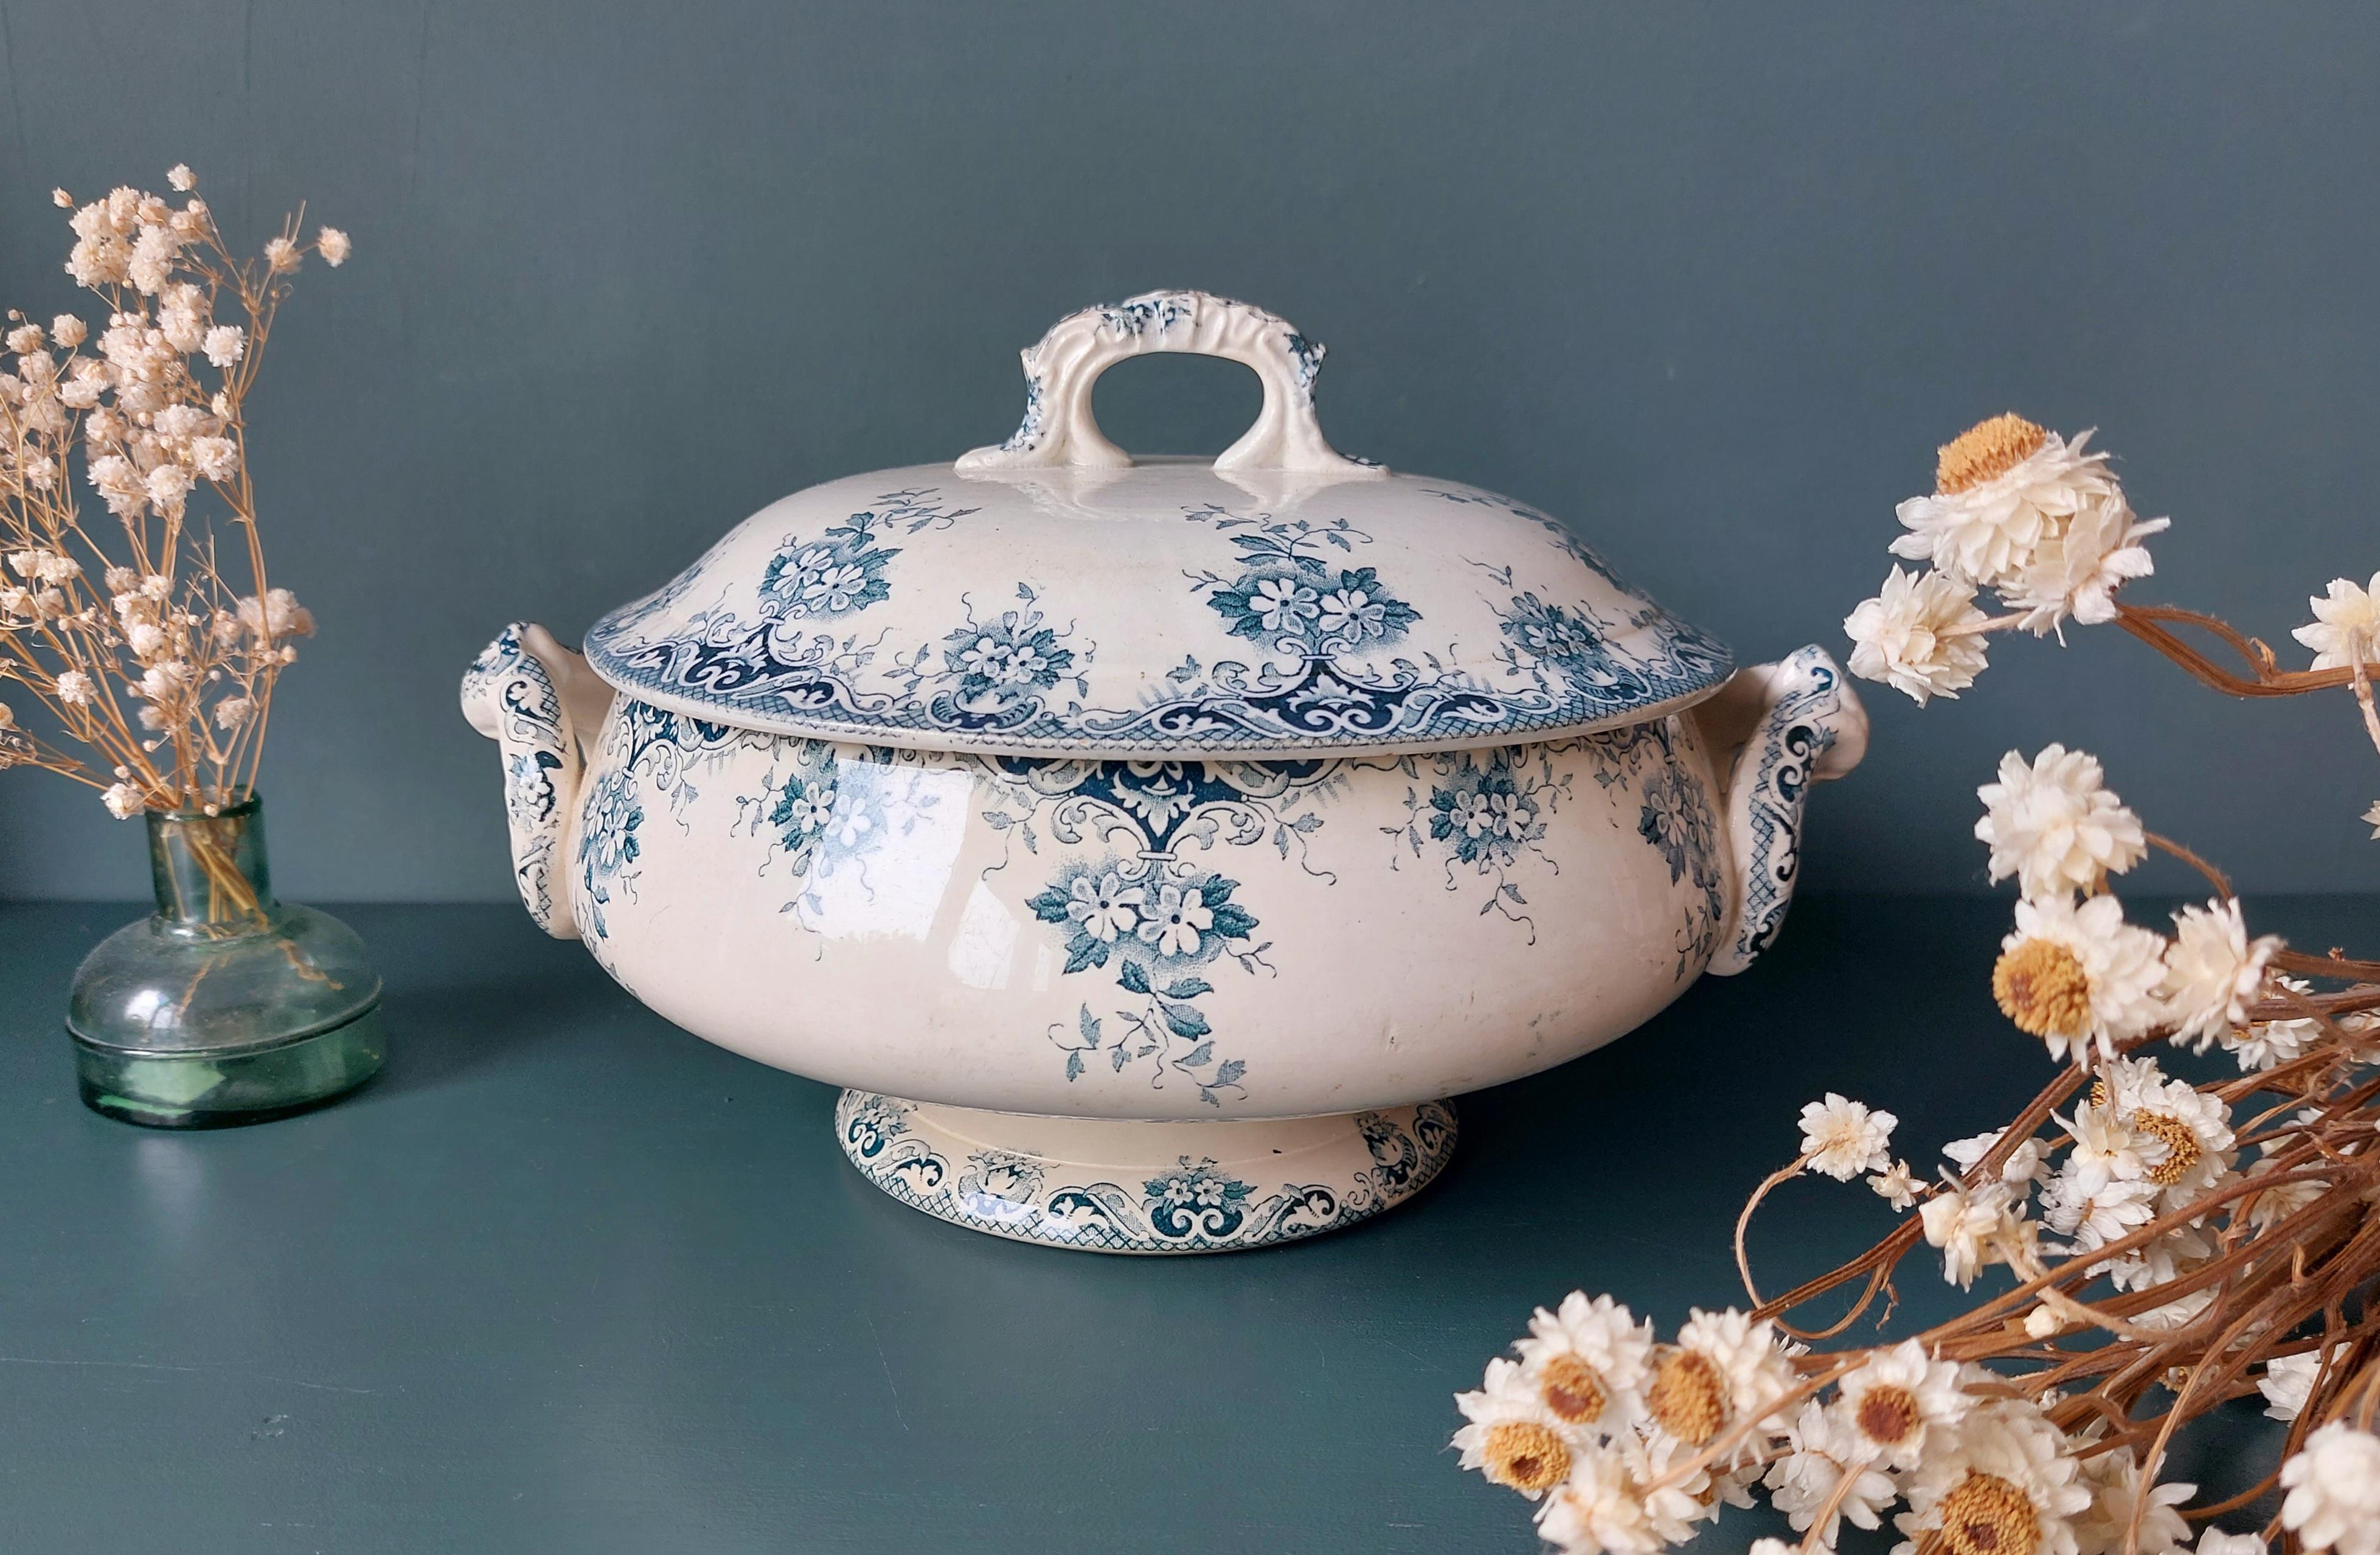 Beautiful antique soup tureen by the ceramic manufacturer 